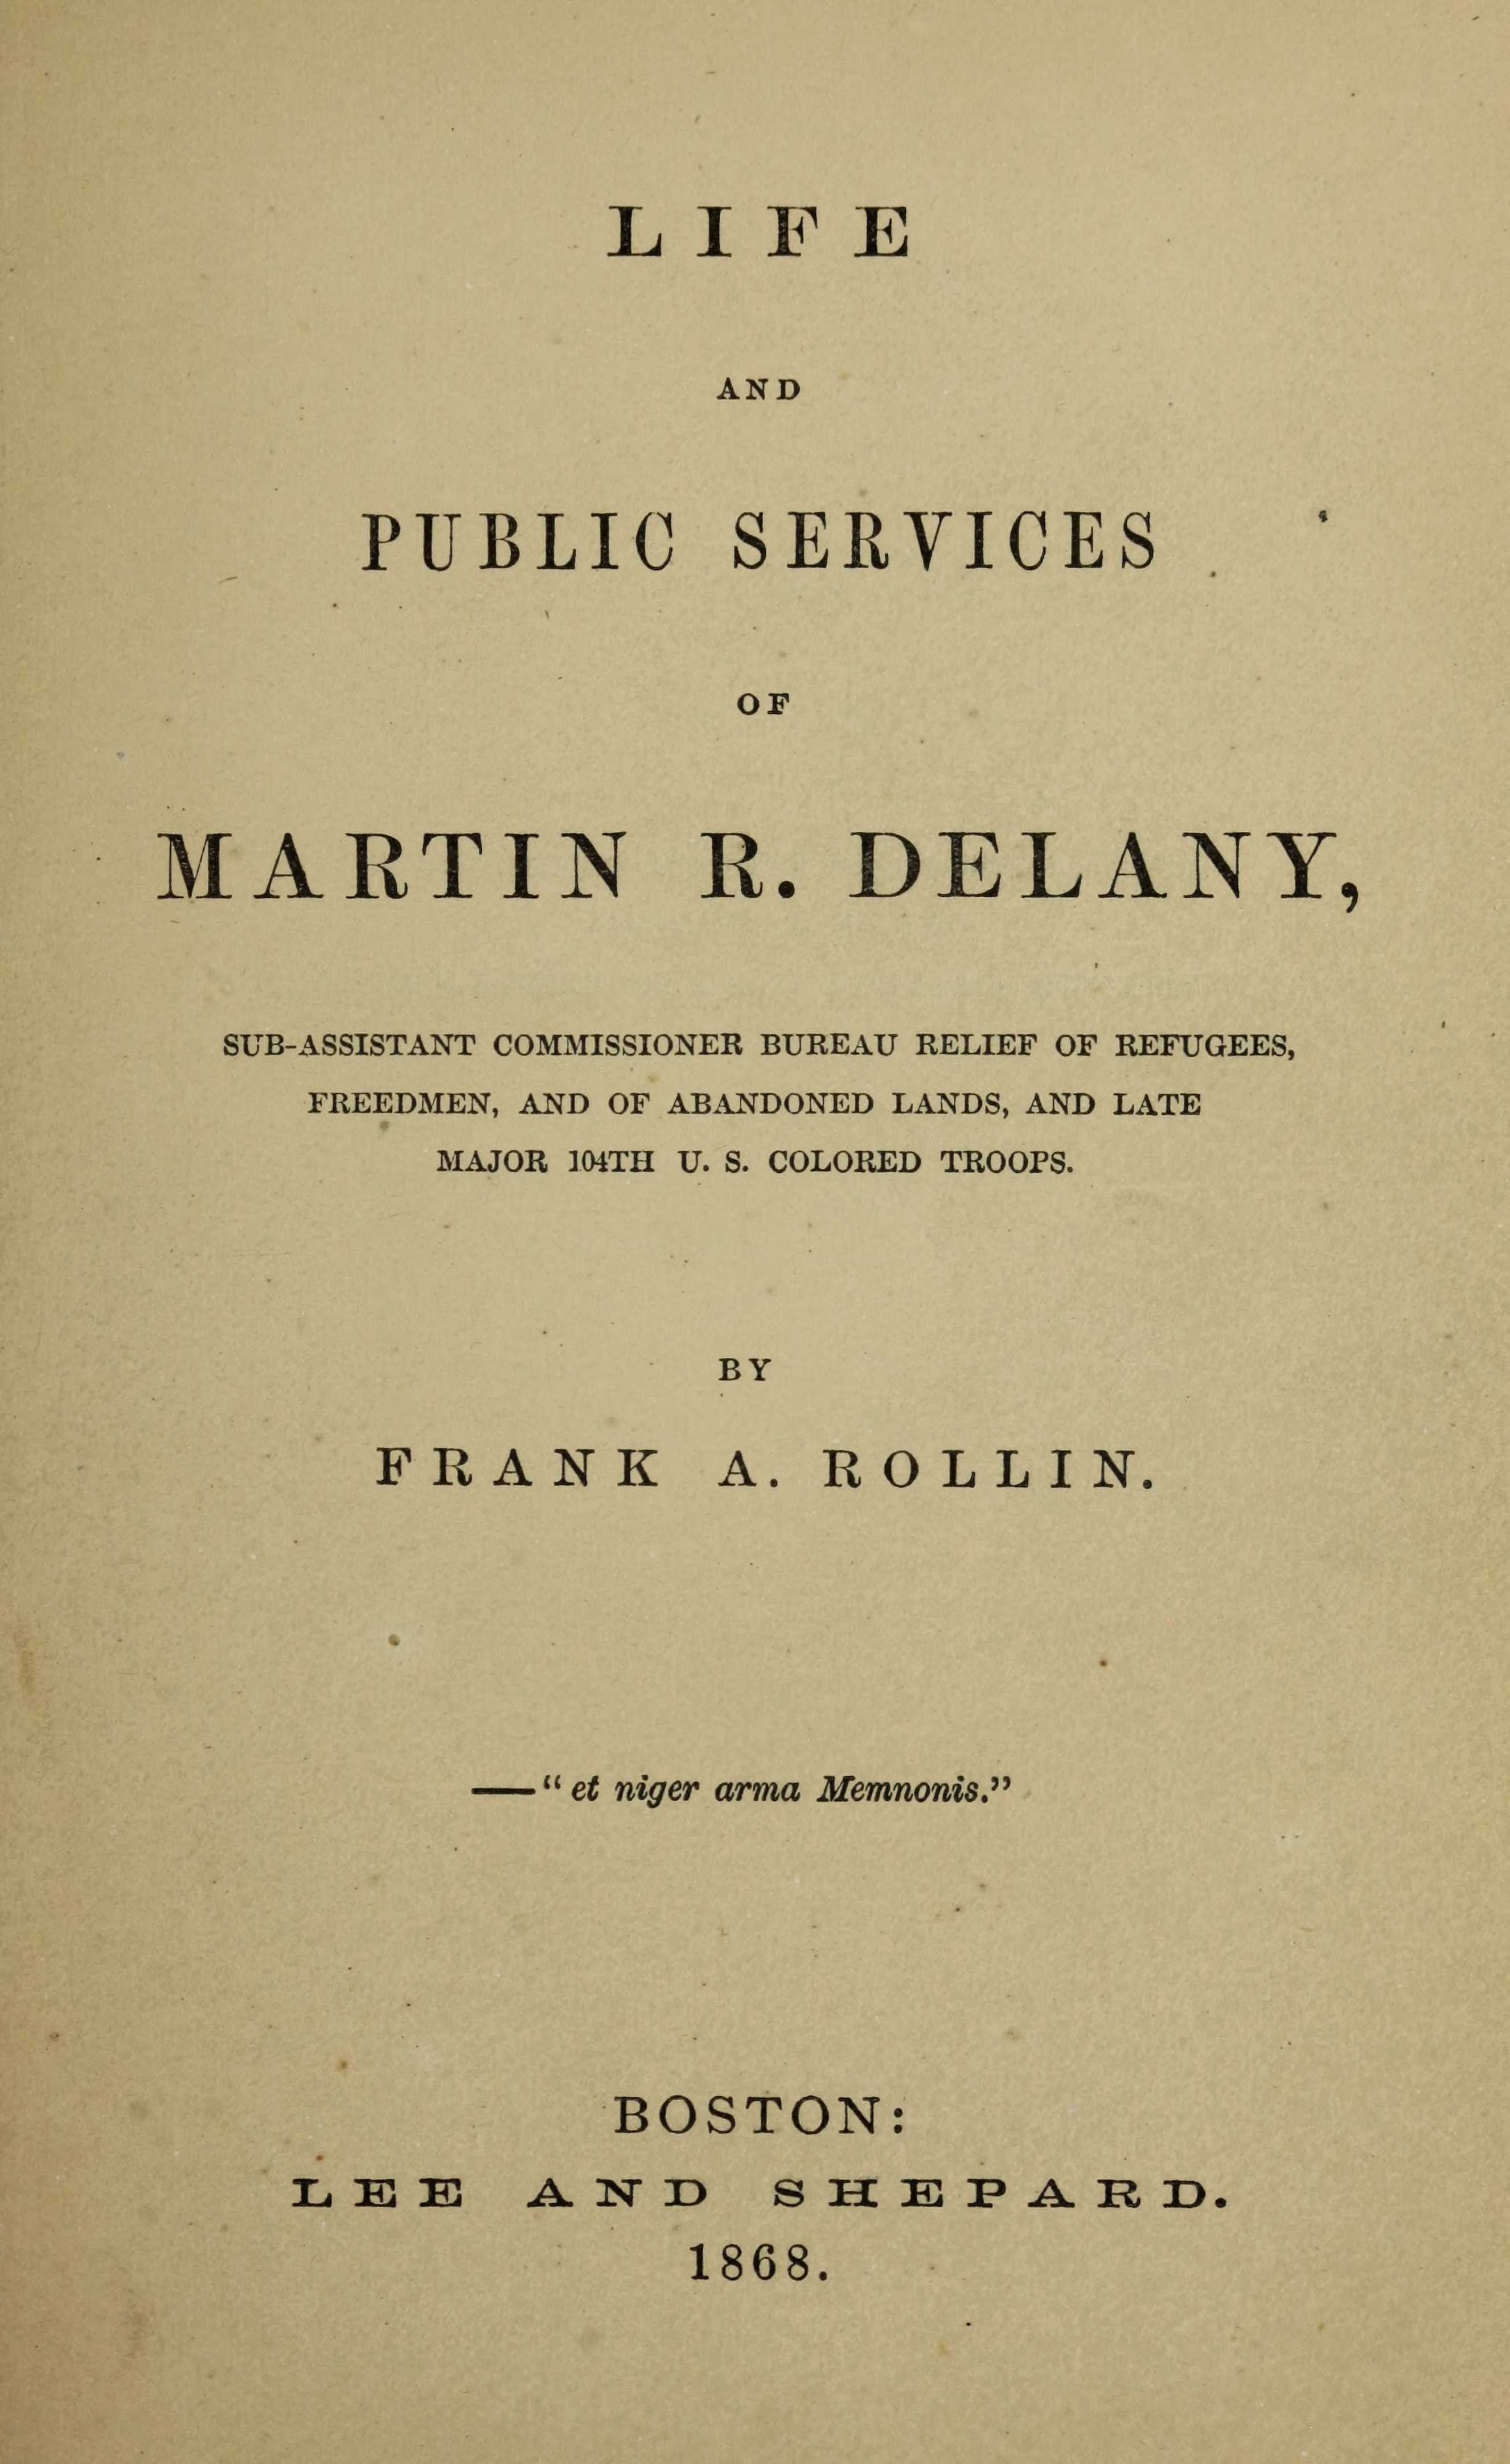 Printed book cover  "LIFE AND PUBLIC SERVICES OF MARTIN R. DELANY, SUB-ASSISTANT COMMISSIONER BUREAU RELIEF OF REFUGEES, FREEDMEN, AND OF ABANDONED LANDS, AND LATE MAJOR 104TH U. S. COLORED TROOPS. BY A. ROLLIN. FRANK -"et niger arma Memnonis." BOSTON: LEE AND SHEPARD. 1868."